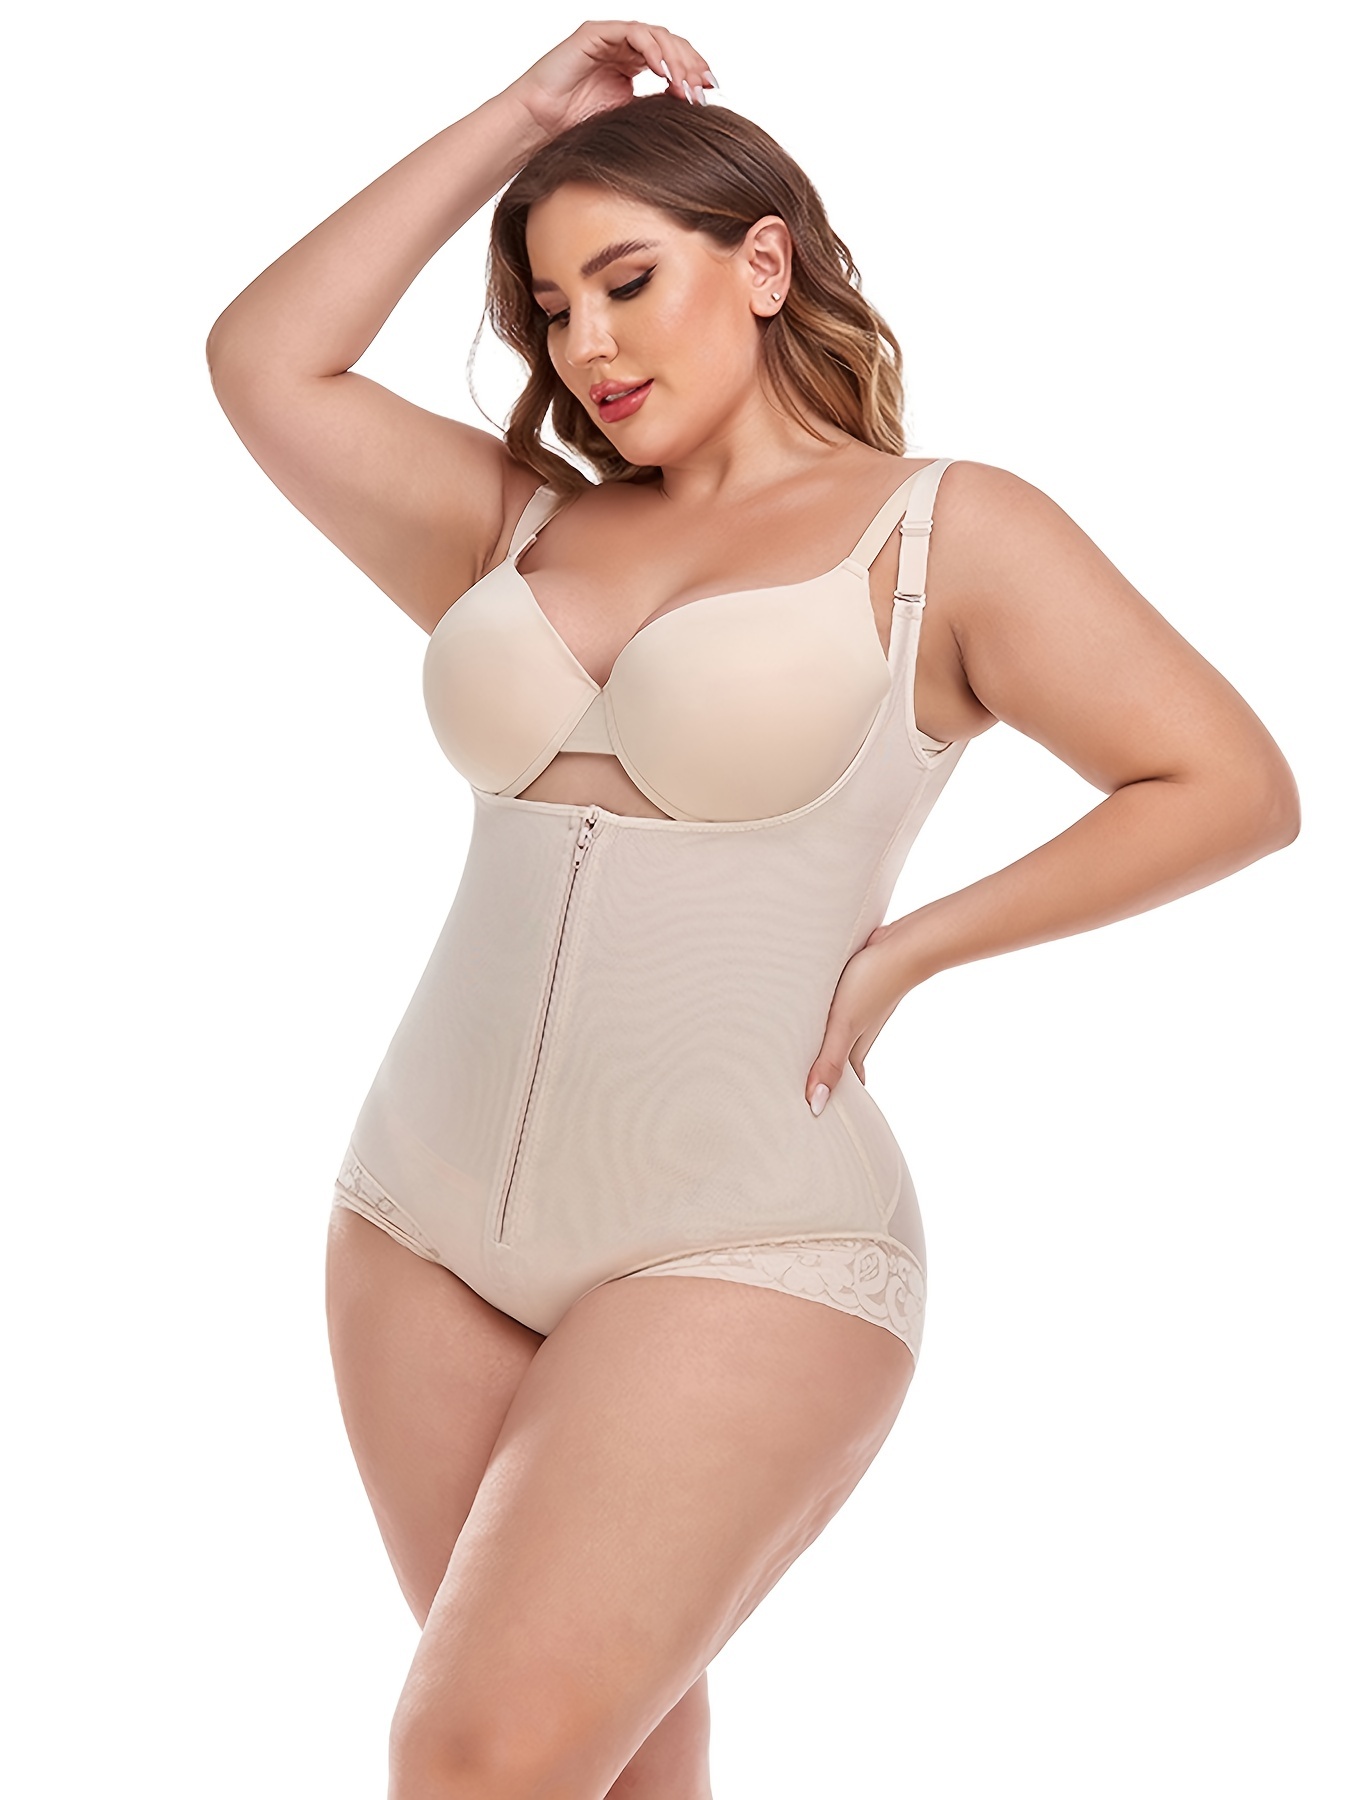 Plus Size Full Body Shapewear - Find The Right HD Full Body For You